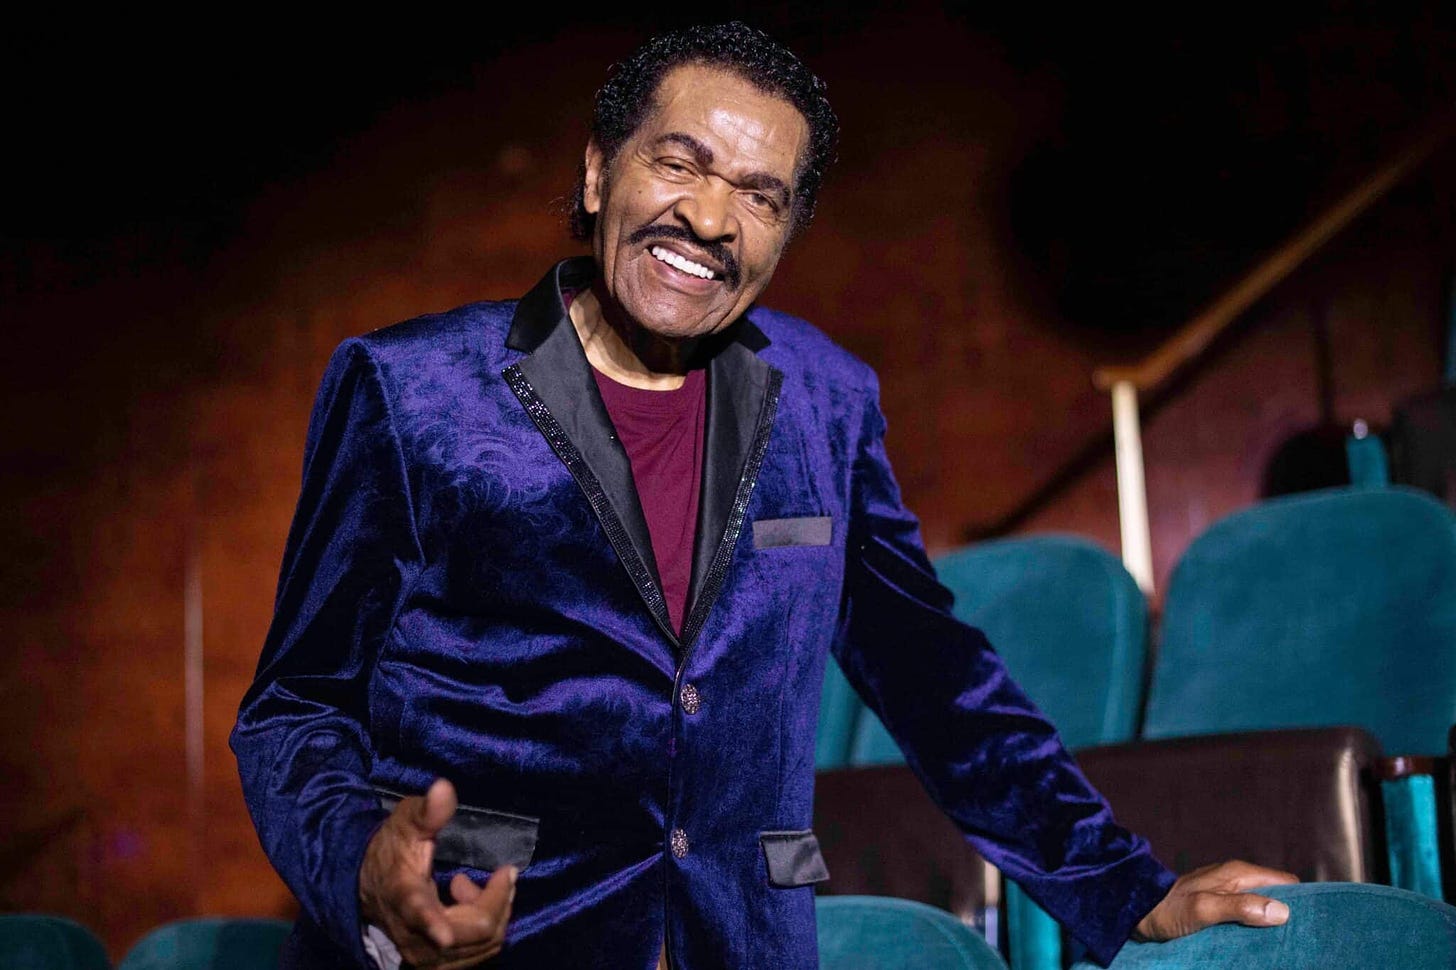 Bobby Rush in a purple velvet jacket pointing at the camera